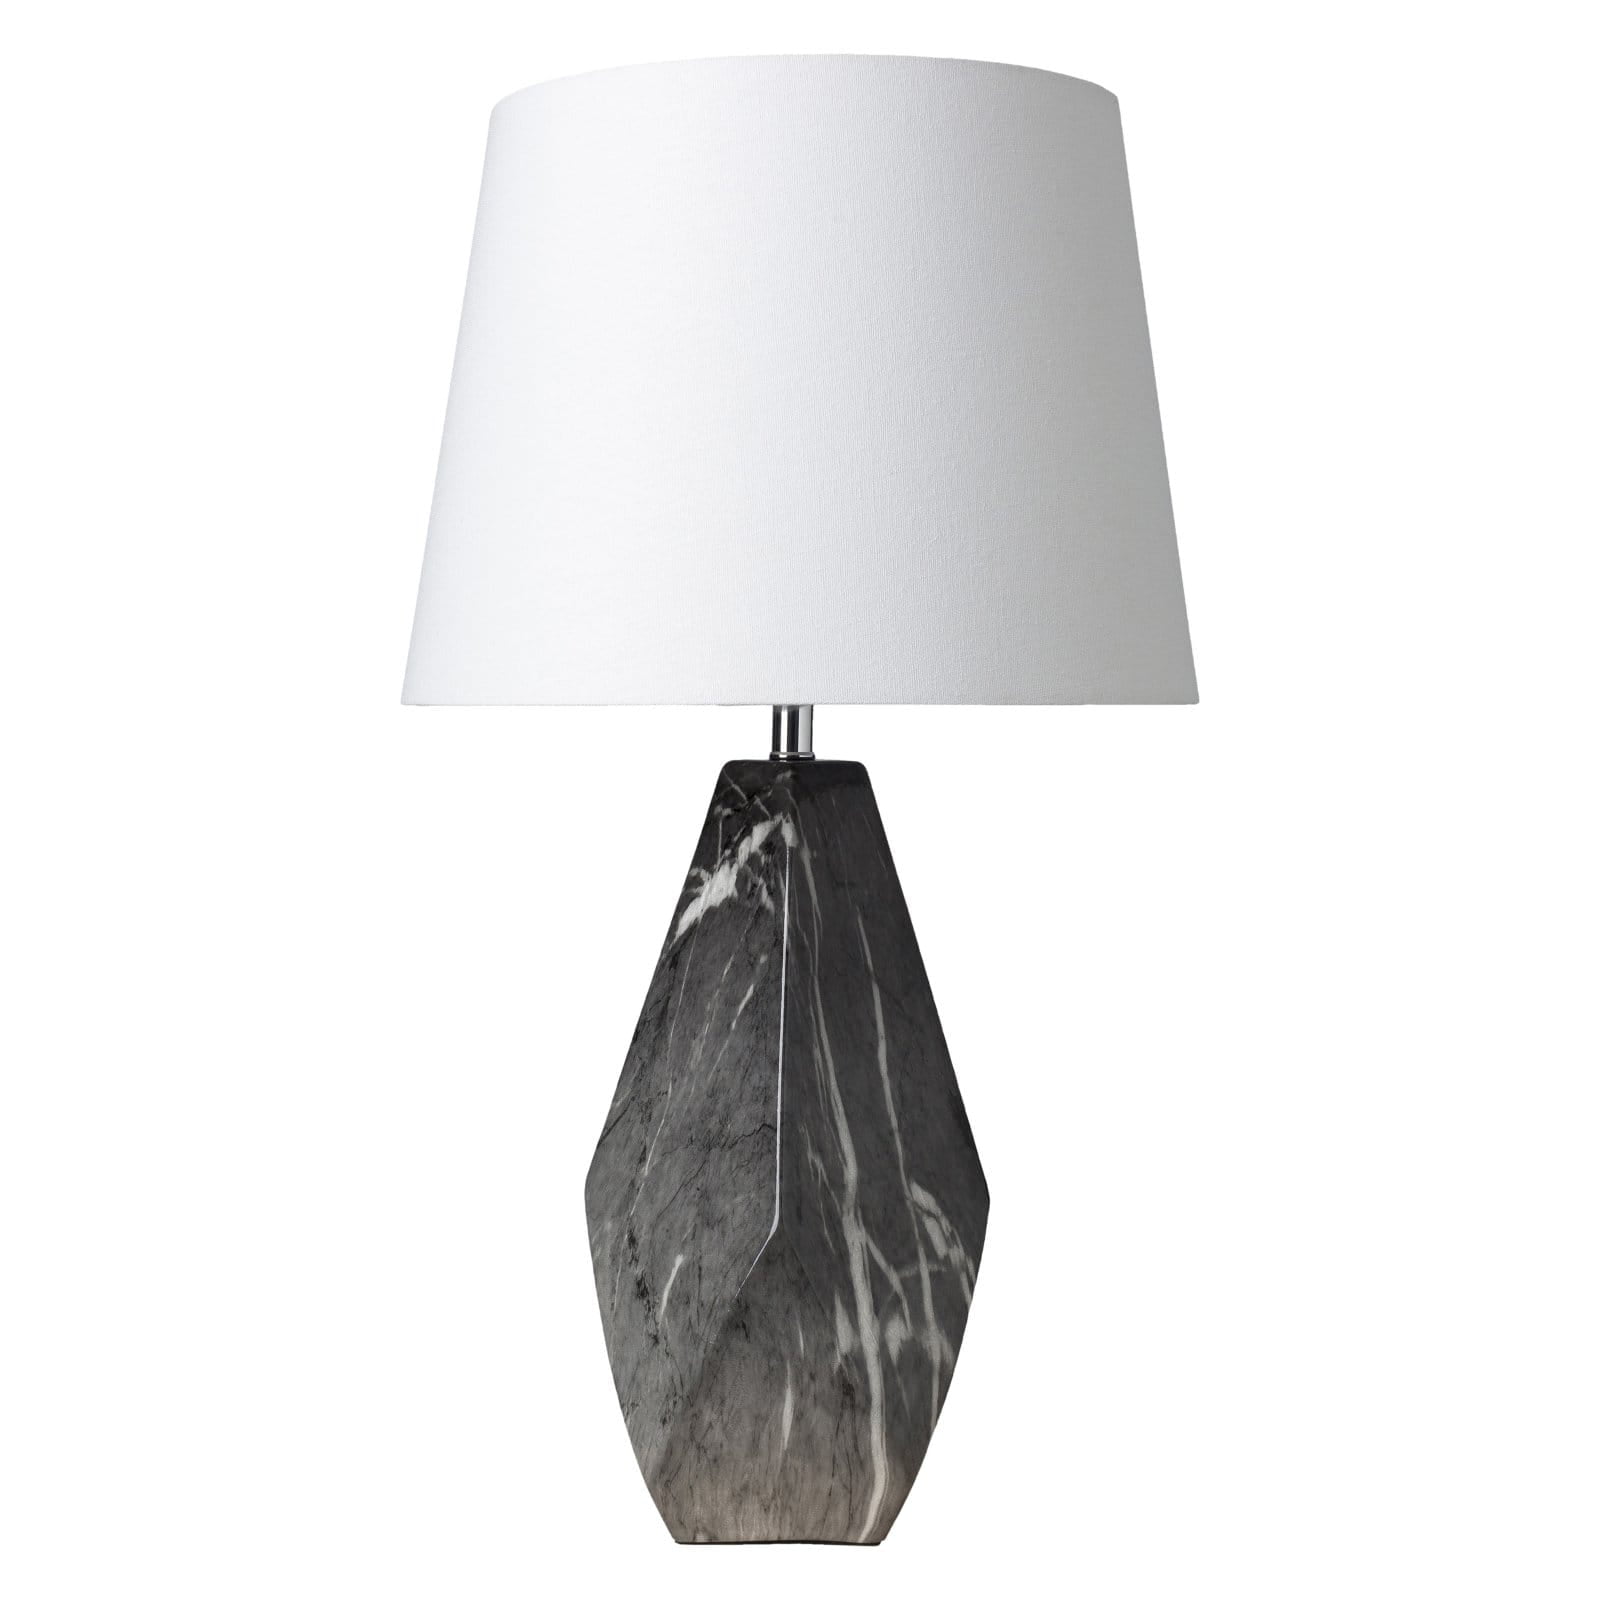 Surya Henley Table Lamp Com, Henley Green Stacked Table Lamp